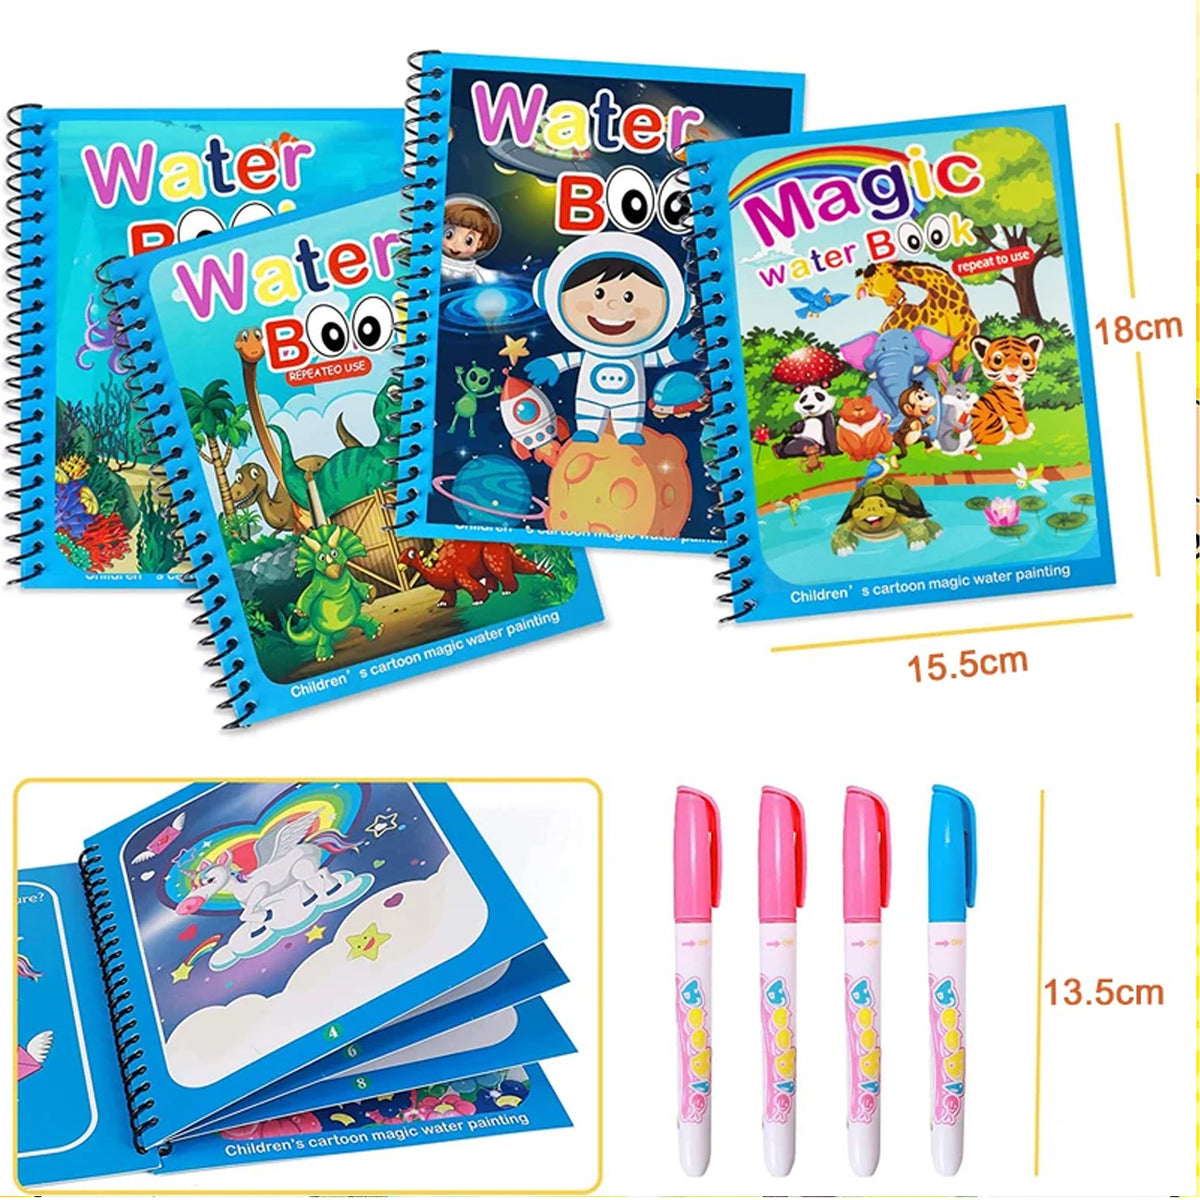 Reusable Water Coloring  Books For Kids In Bulk